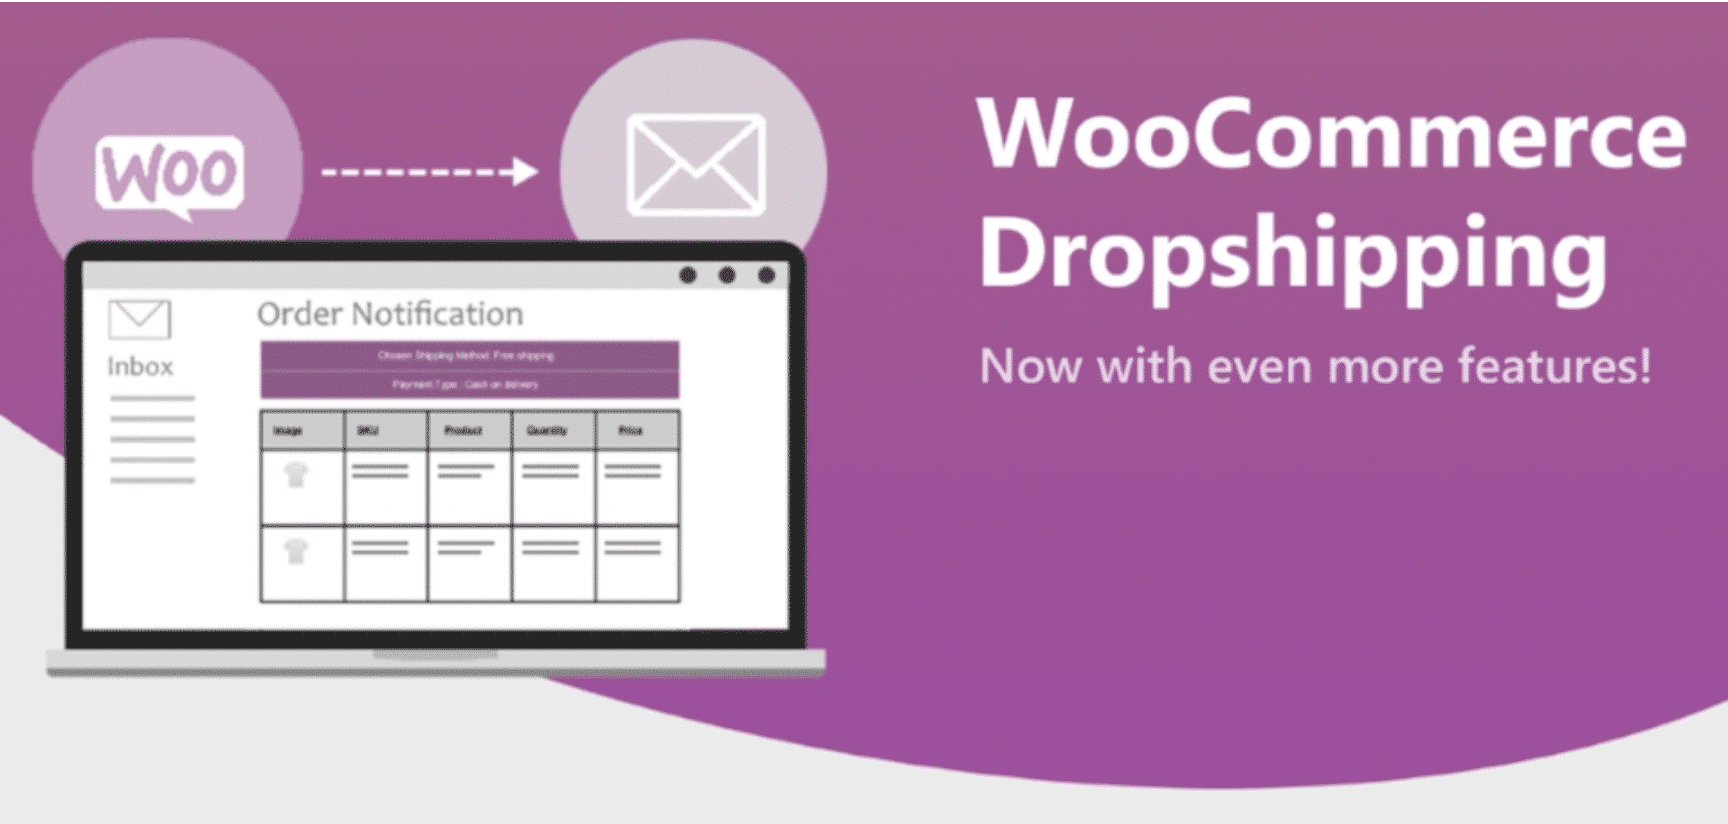 WooCommerce Dropshipping is a dropshipping plugin on WordPress.